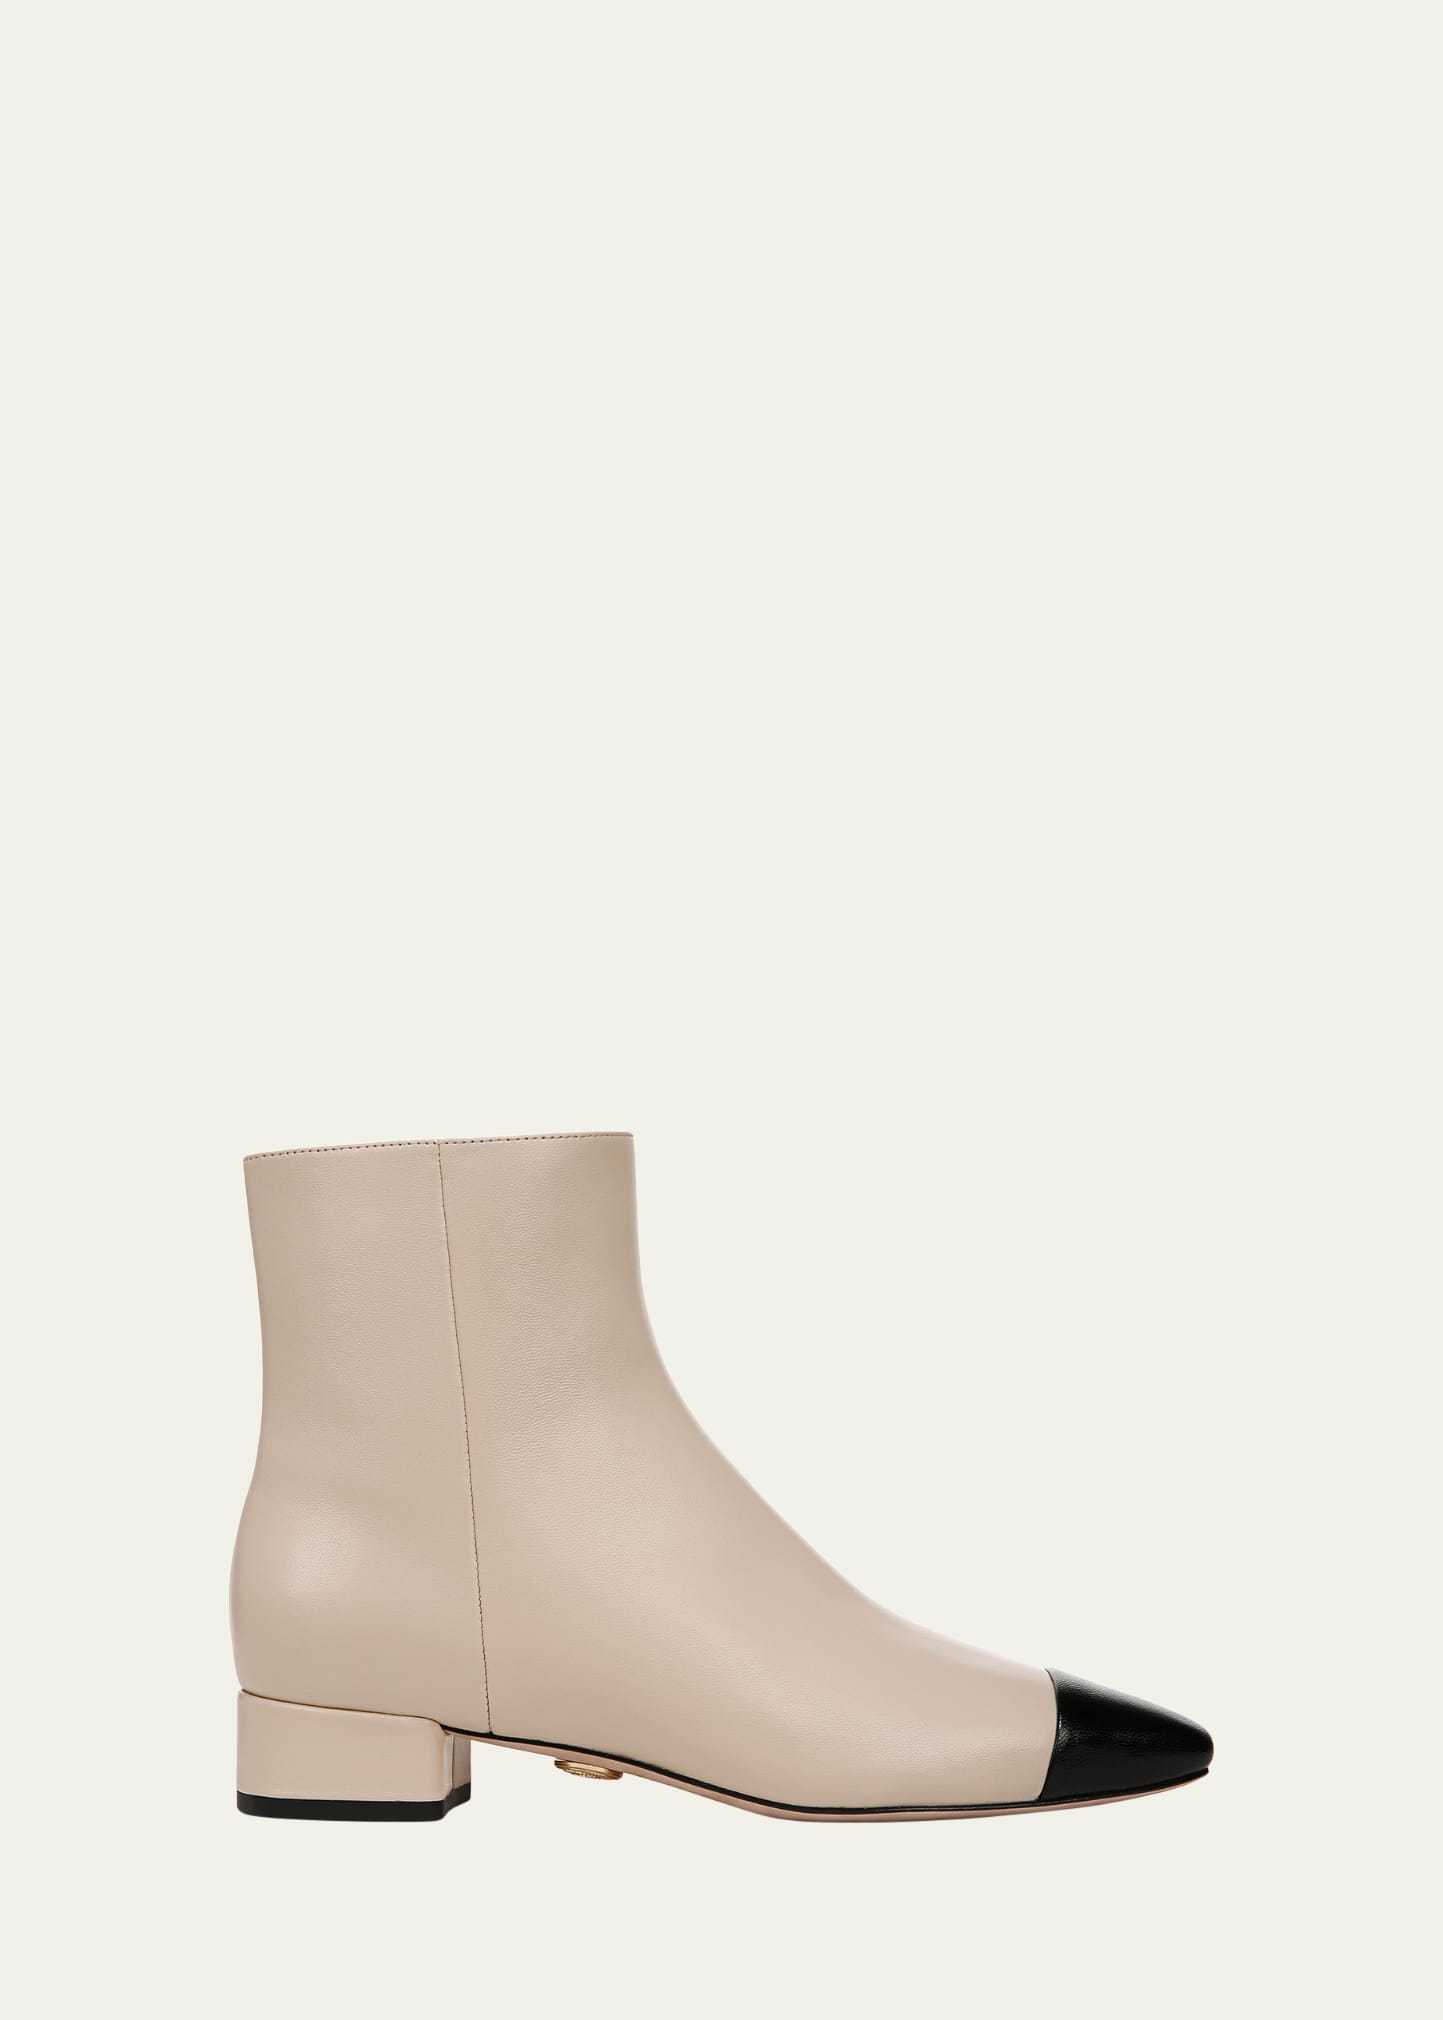 Veronica Beard Cecile Bicolor Cap-toe Ankle Booties In Gold